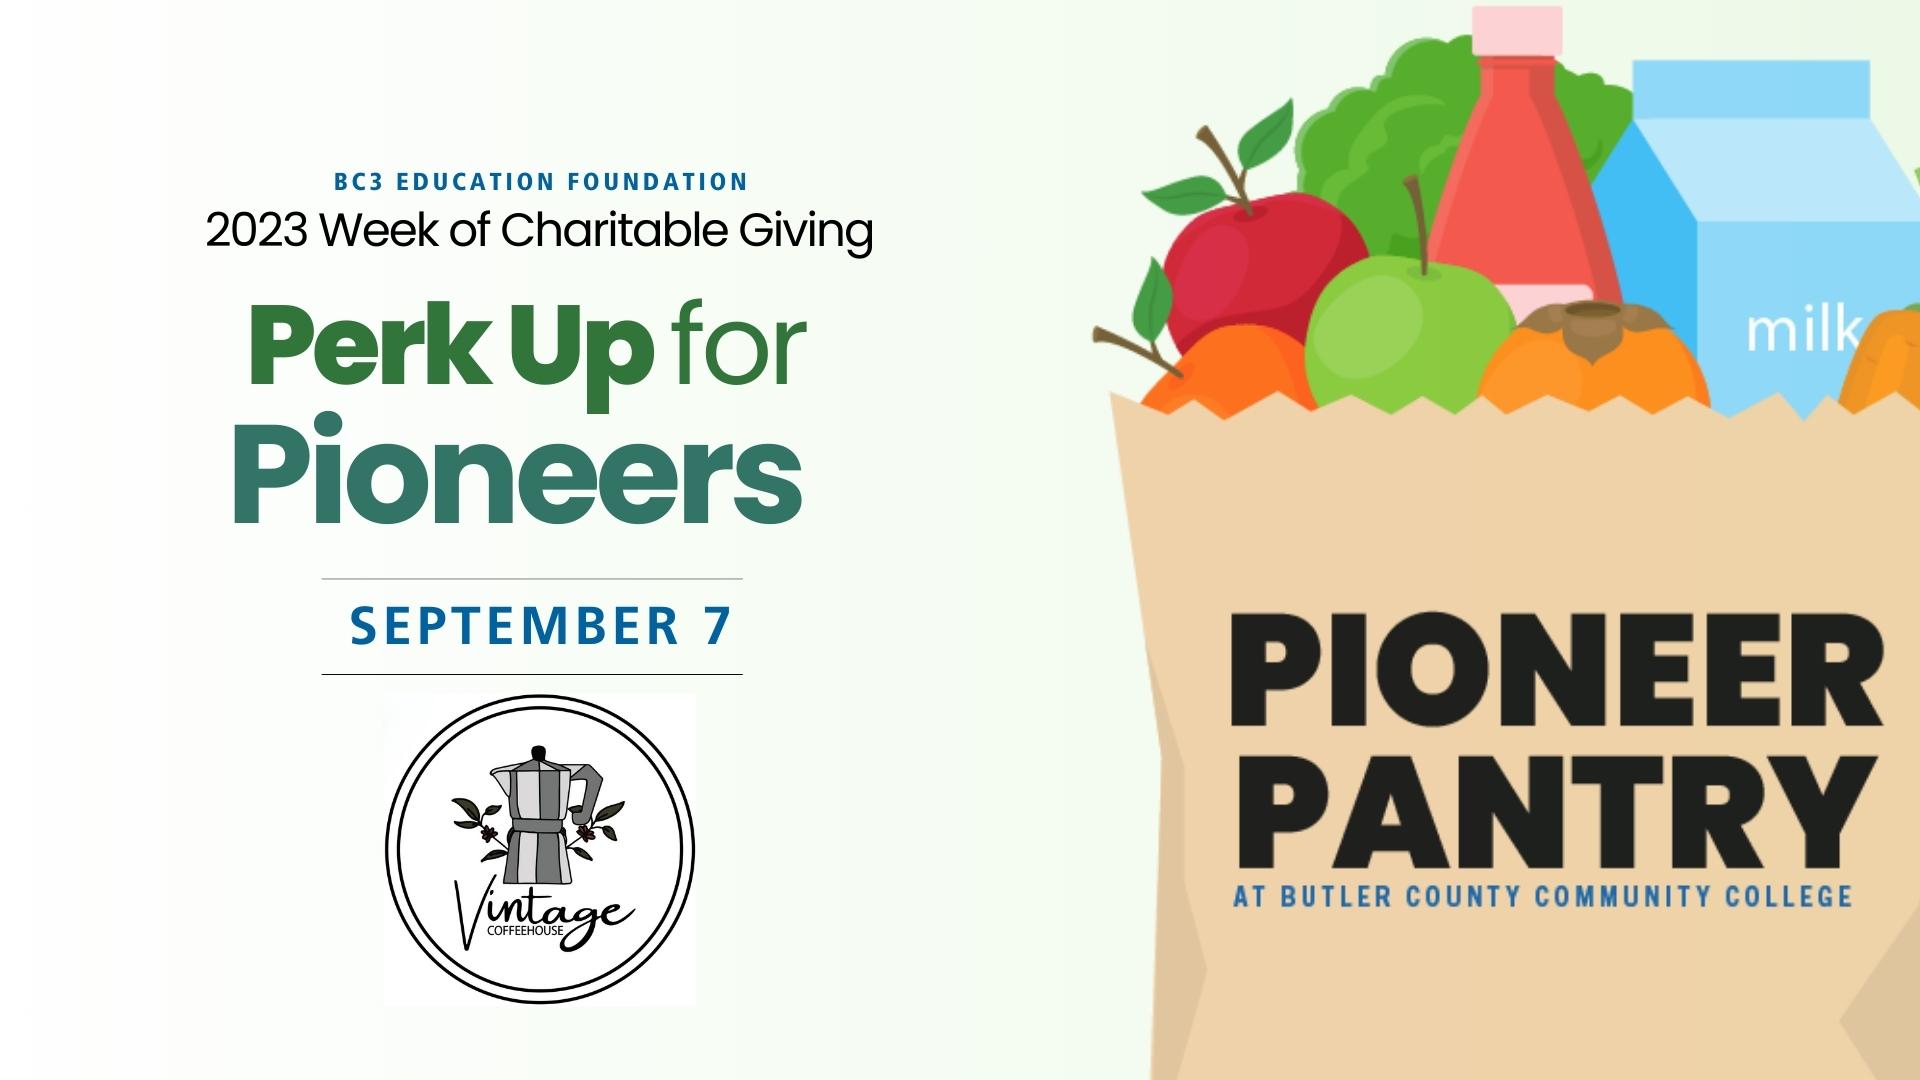 bc3 education foundation 2023 week of charitable giving september 7 Perk Up For Pioneer Vintage Coffeehouse